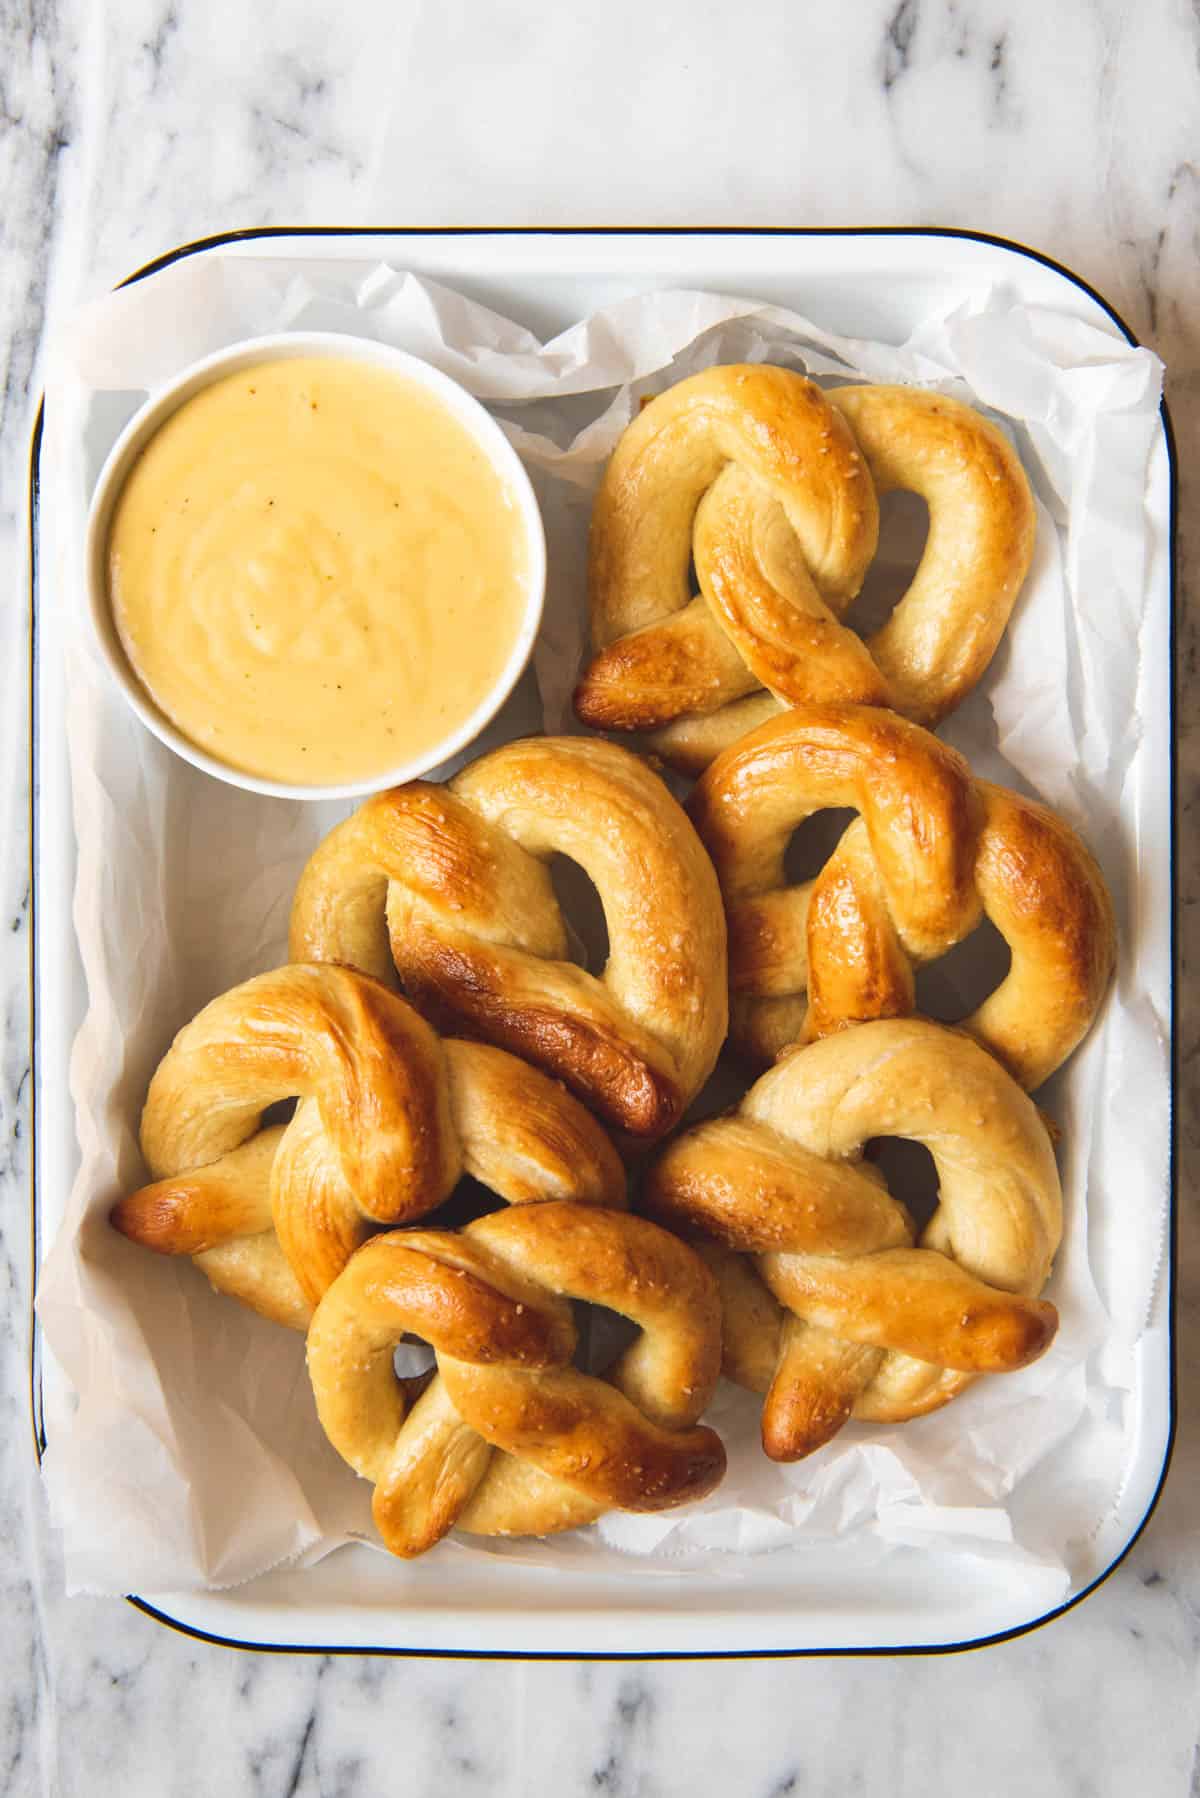 An image of some homemade soft pretzels stacked in a dish with a bowl of mustard cheese dipping sauce on the side.